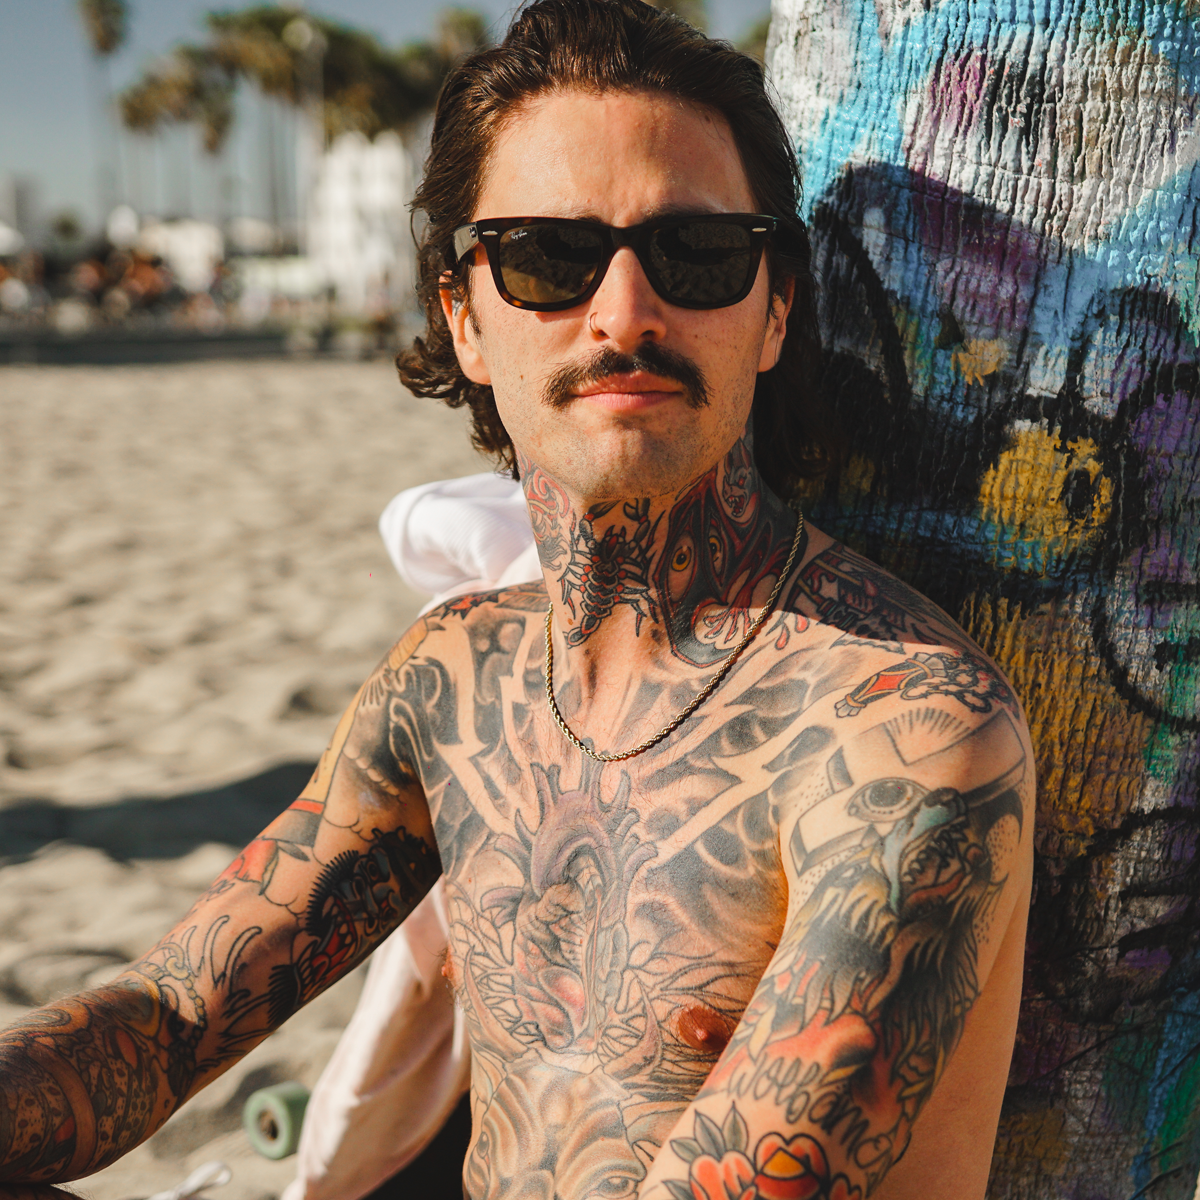 How To Become A Tattoo Artist: Tips to Get Started